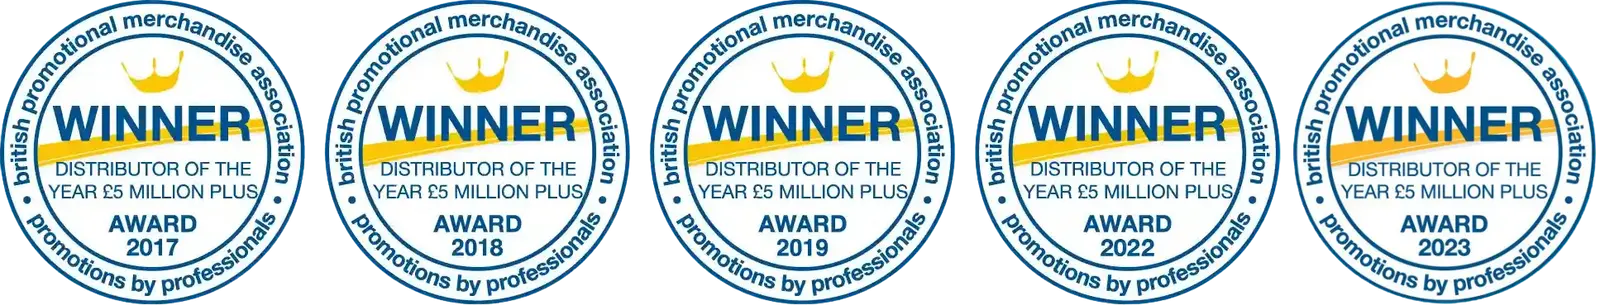 1st Place: BPMA Distributor of the Year 2017, 2018, 2019 & 2022